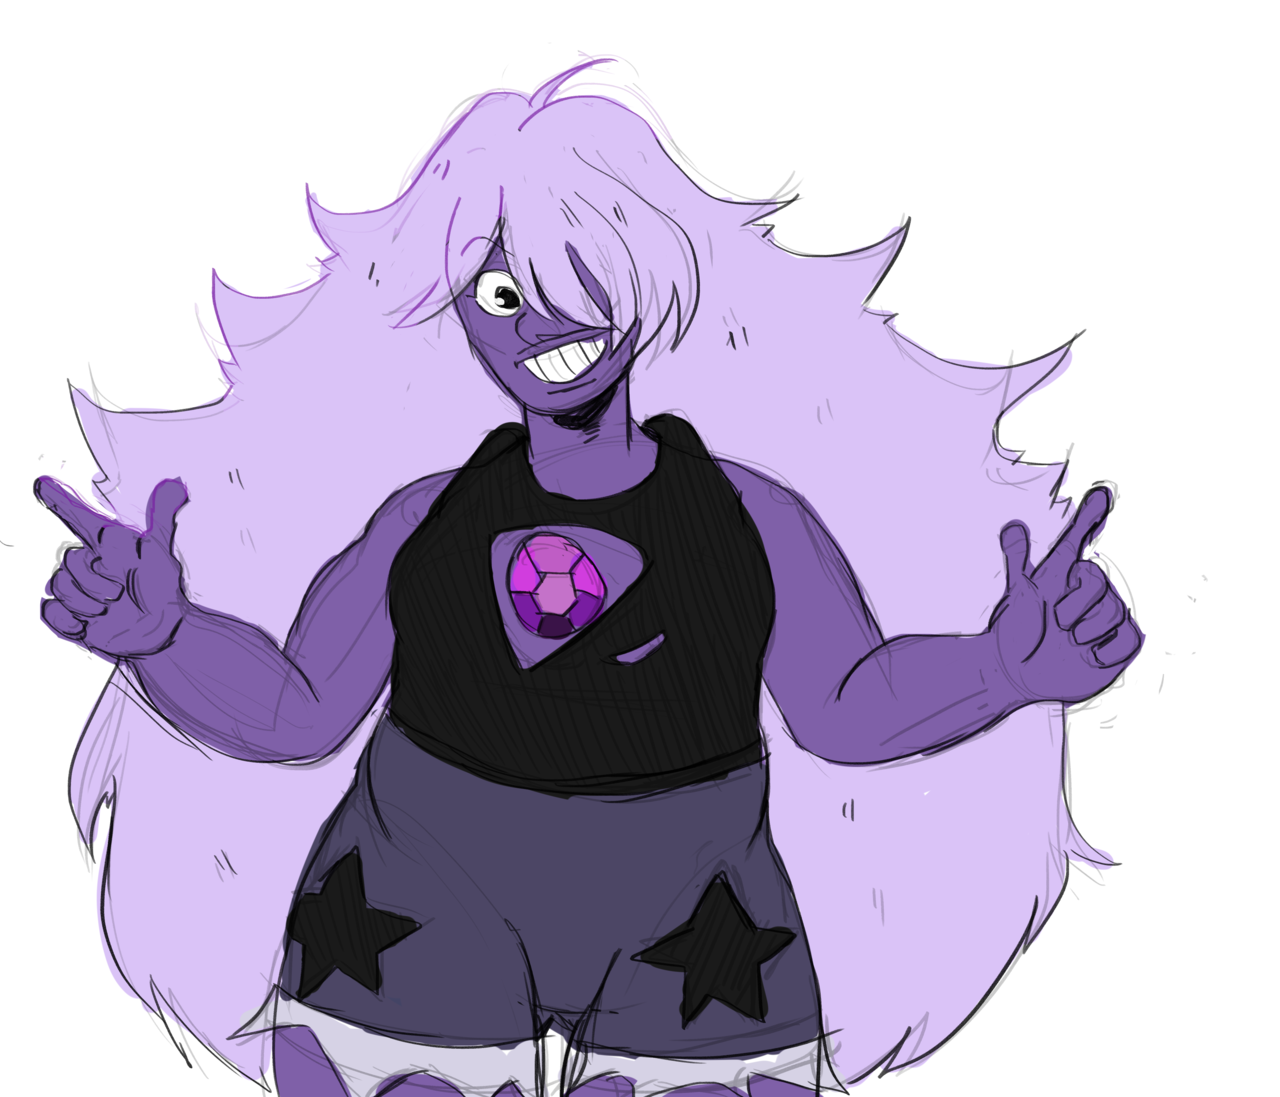 Quick Amethyst sketch in her new outfit